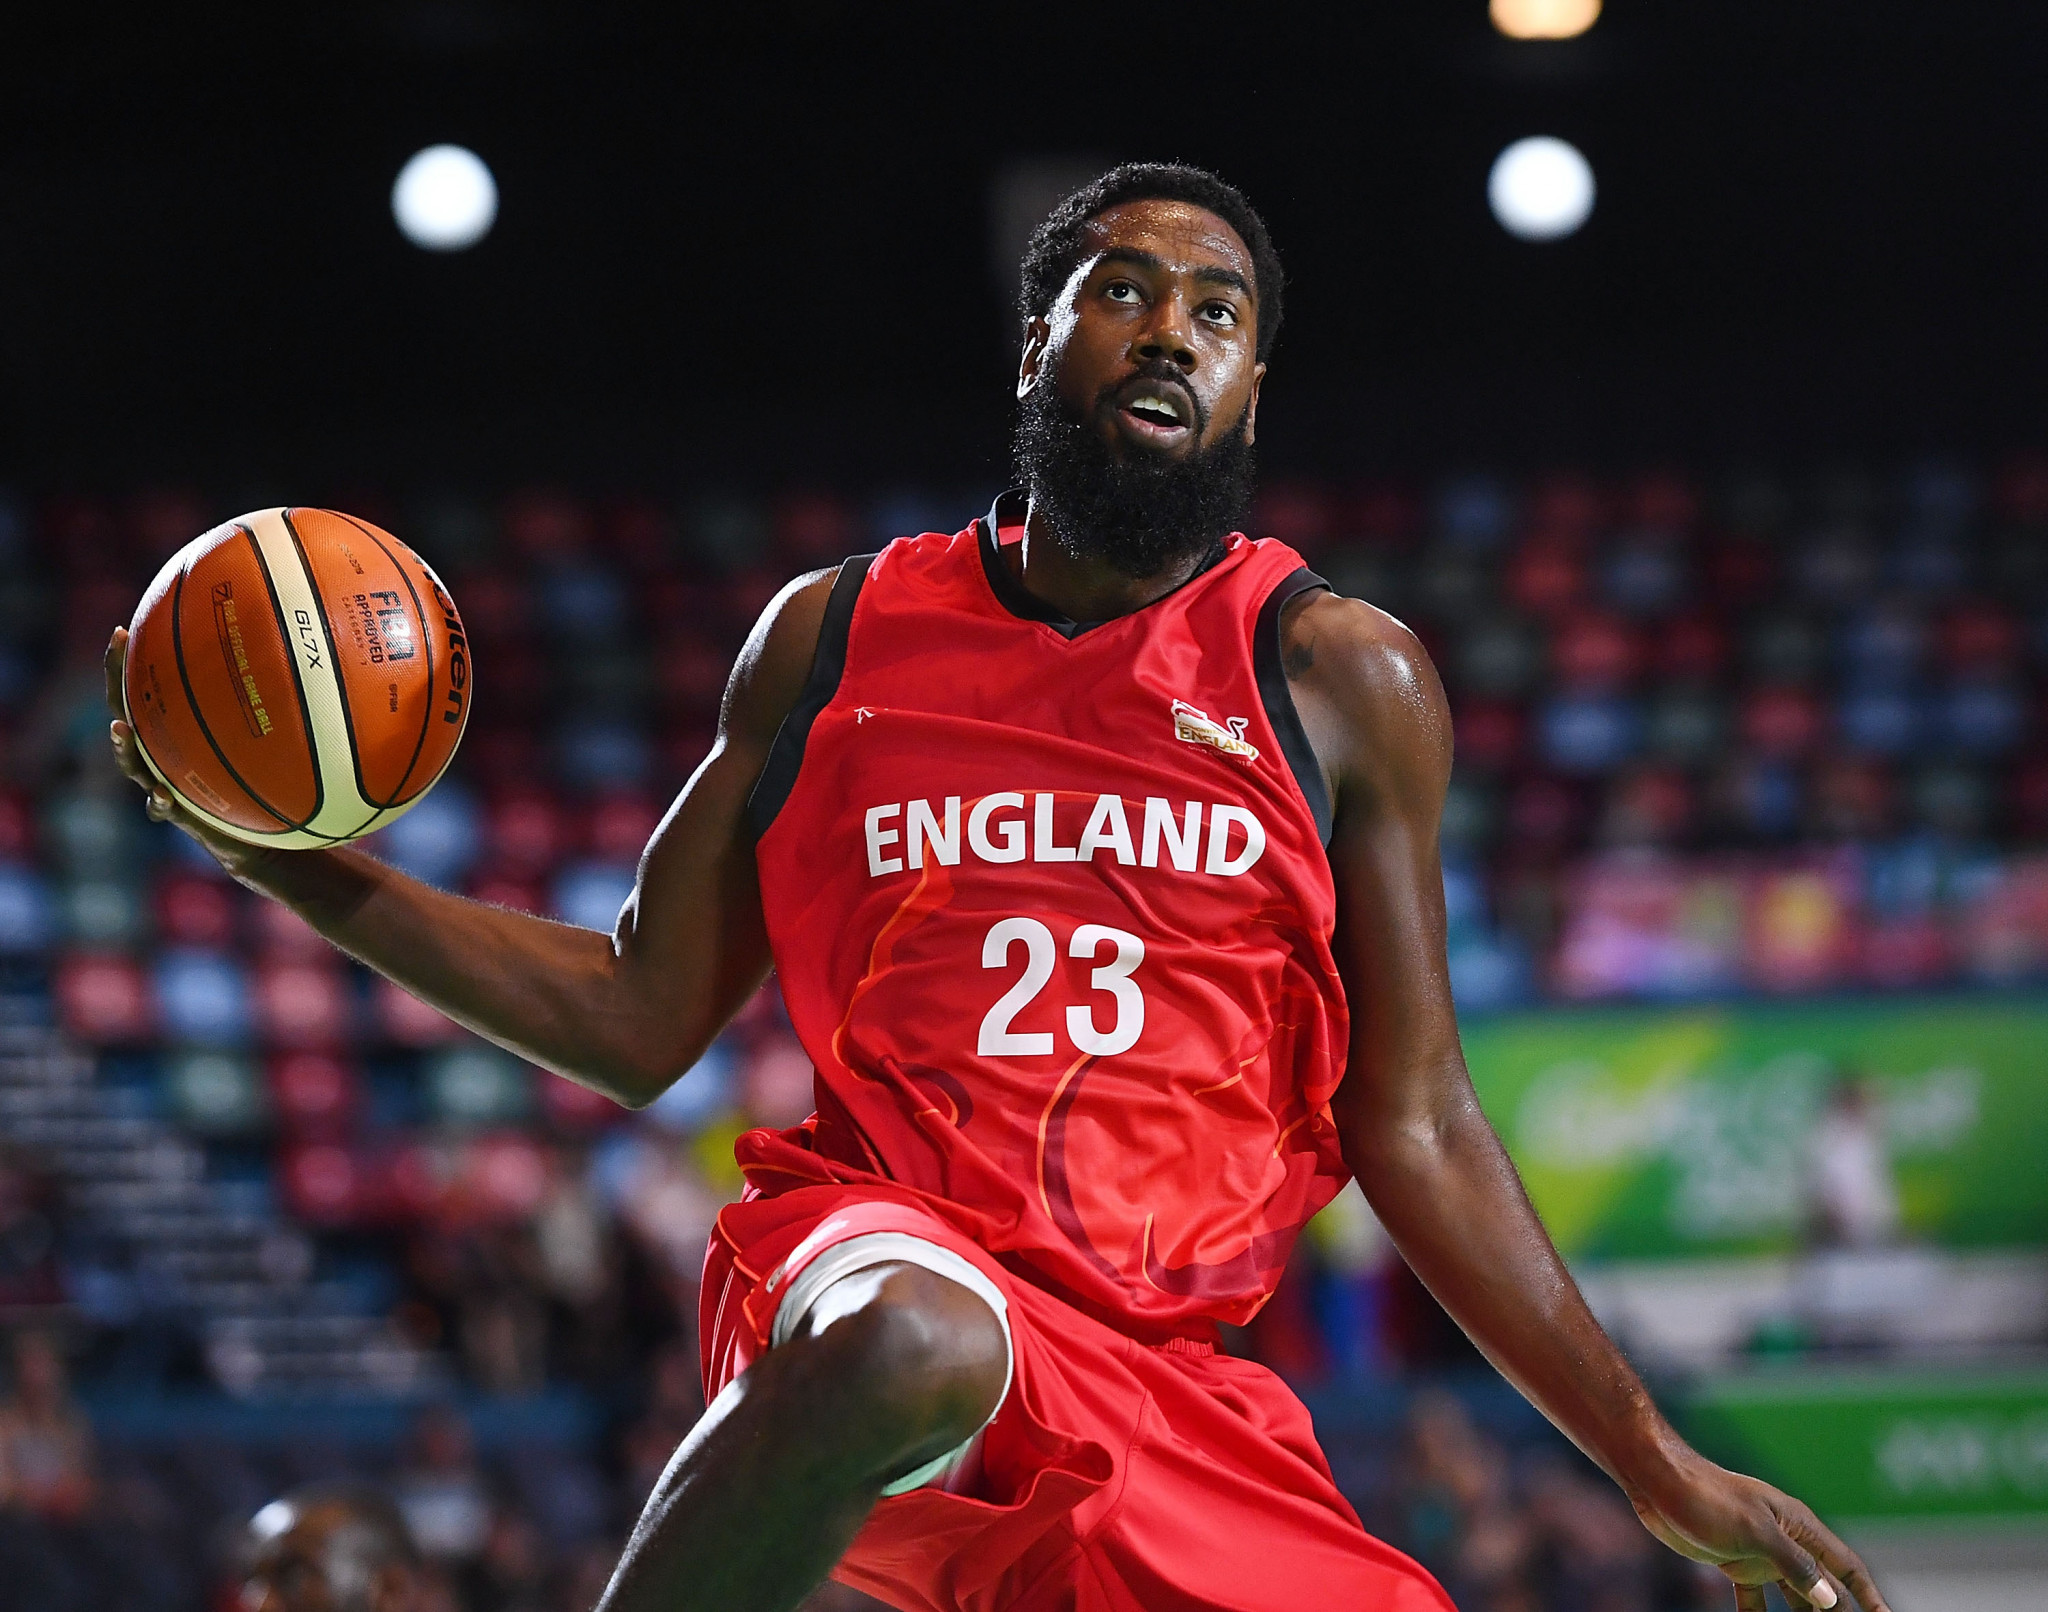 Team England men’s basketball player Orlan Jackman, who is from London, attended the session at Salisbury Hall ©Getty Images